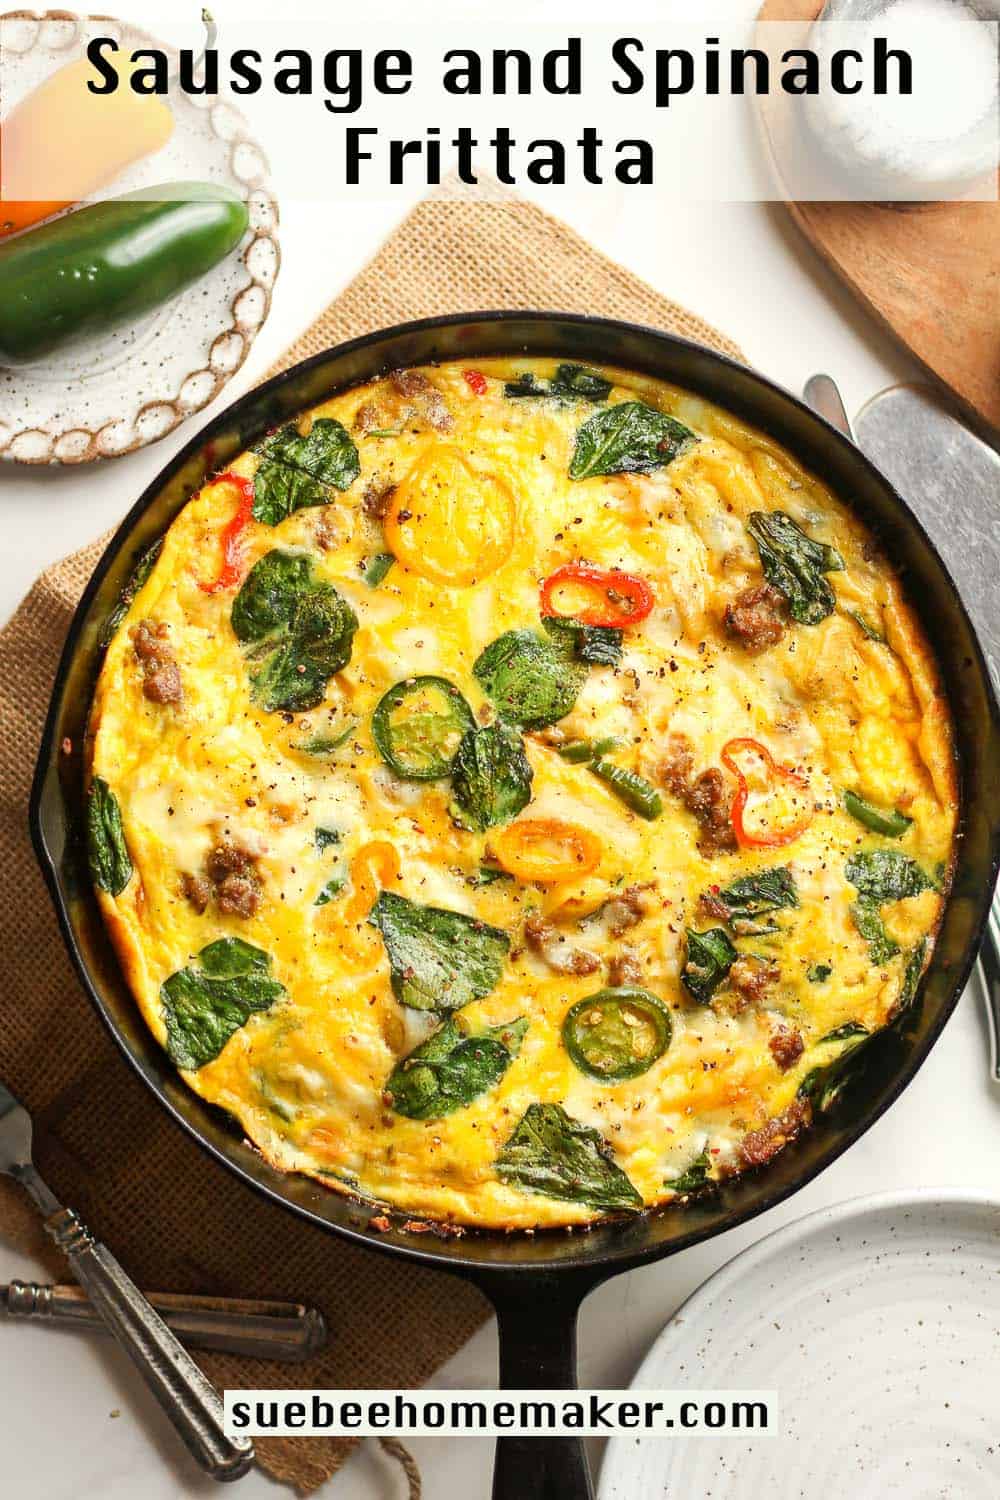 A cast iron skillet of the sausage frittata with veggies.